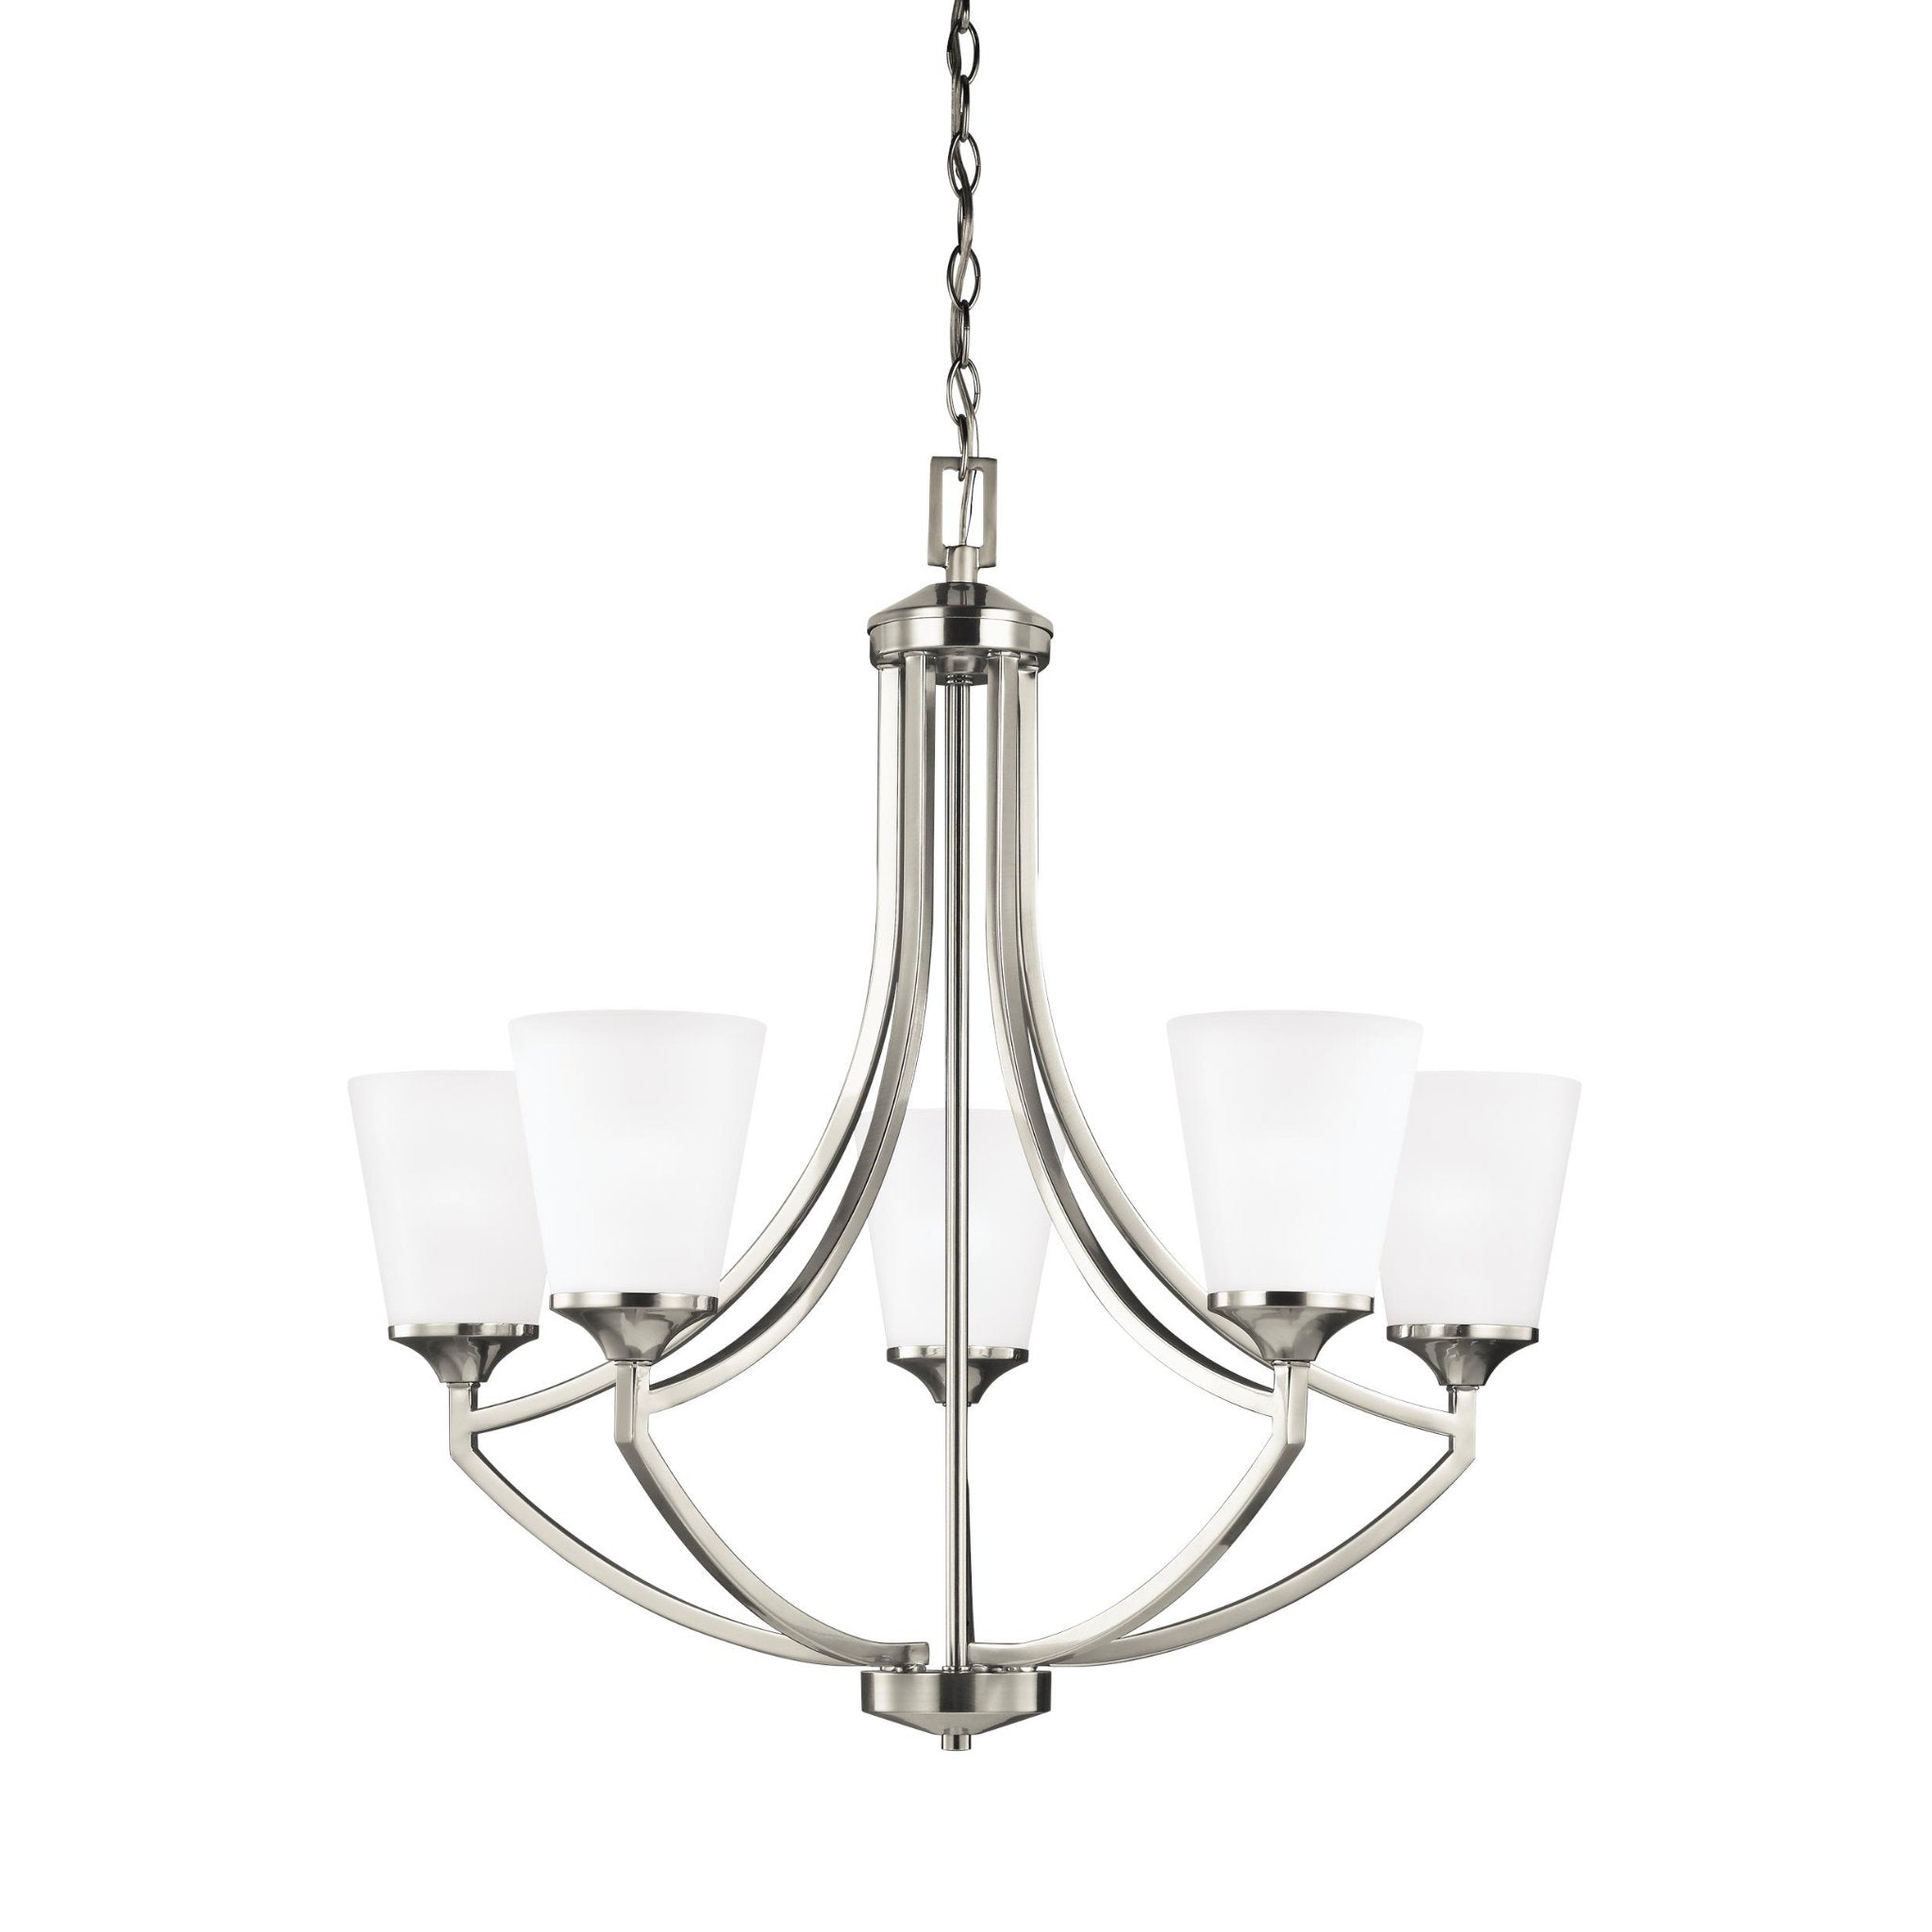 Hanford Five Light Chandelier LED Transitional 27.625" Height Steel Round Satin Etched Shade in Brushed Nickel